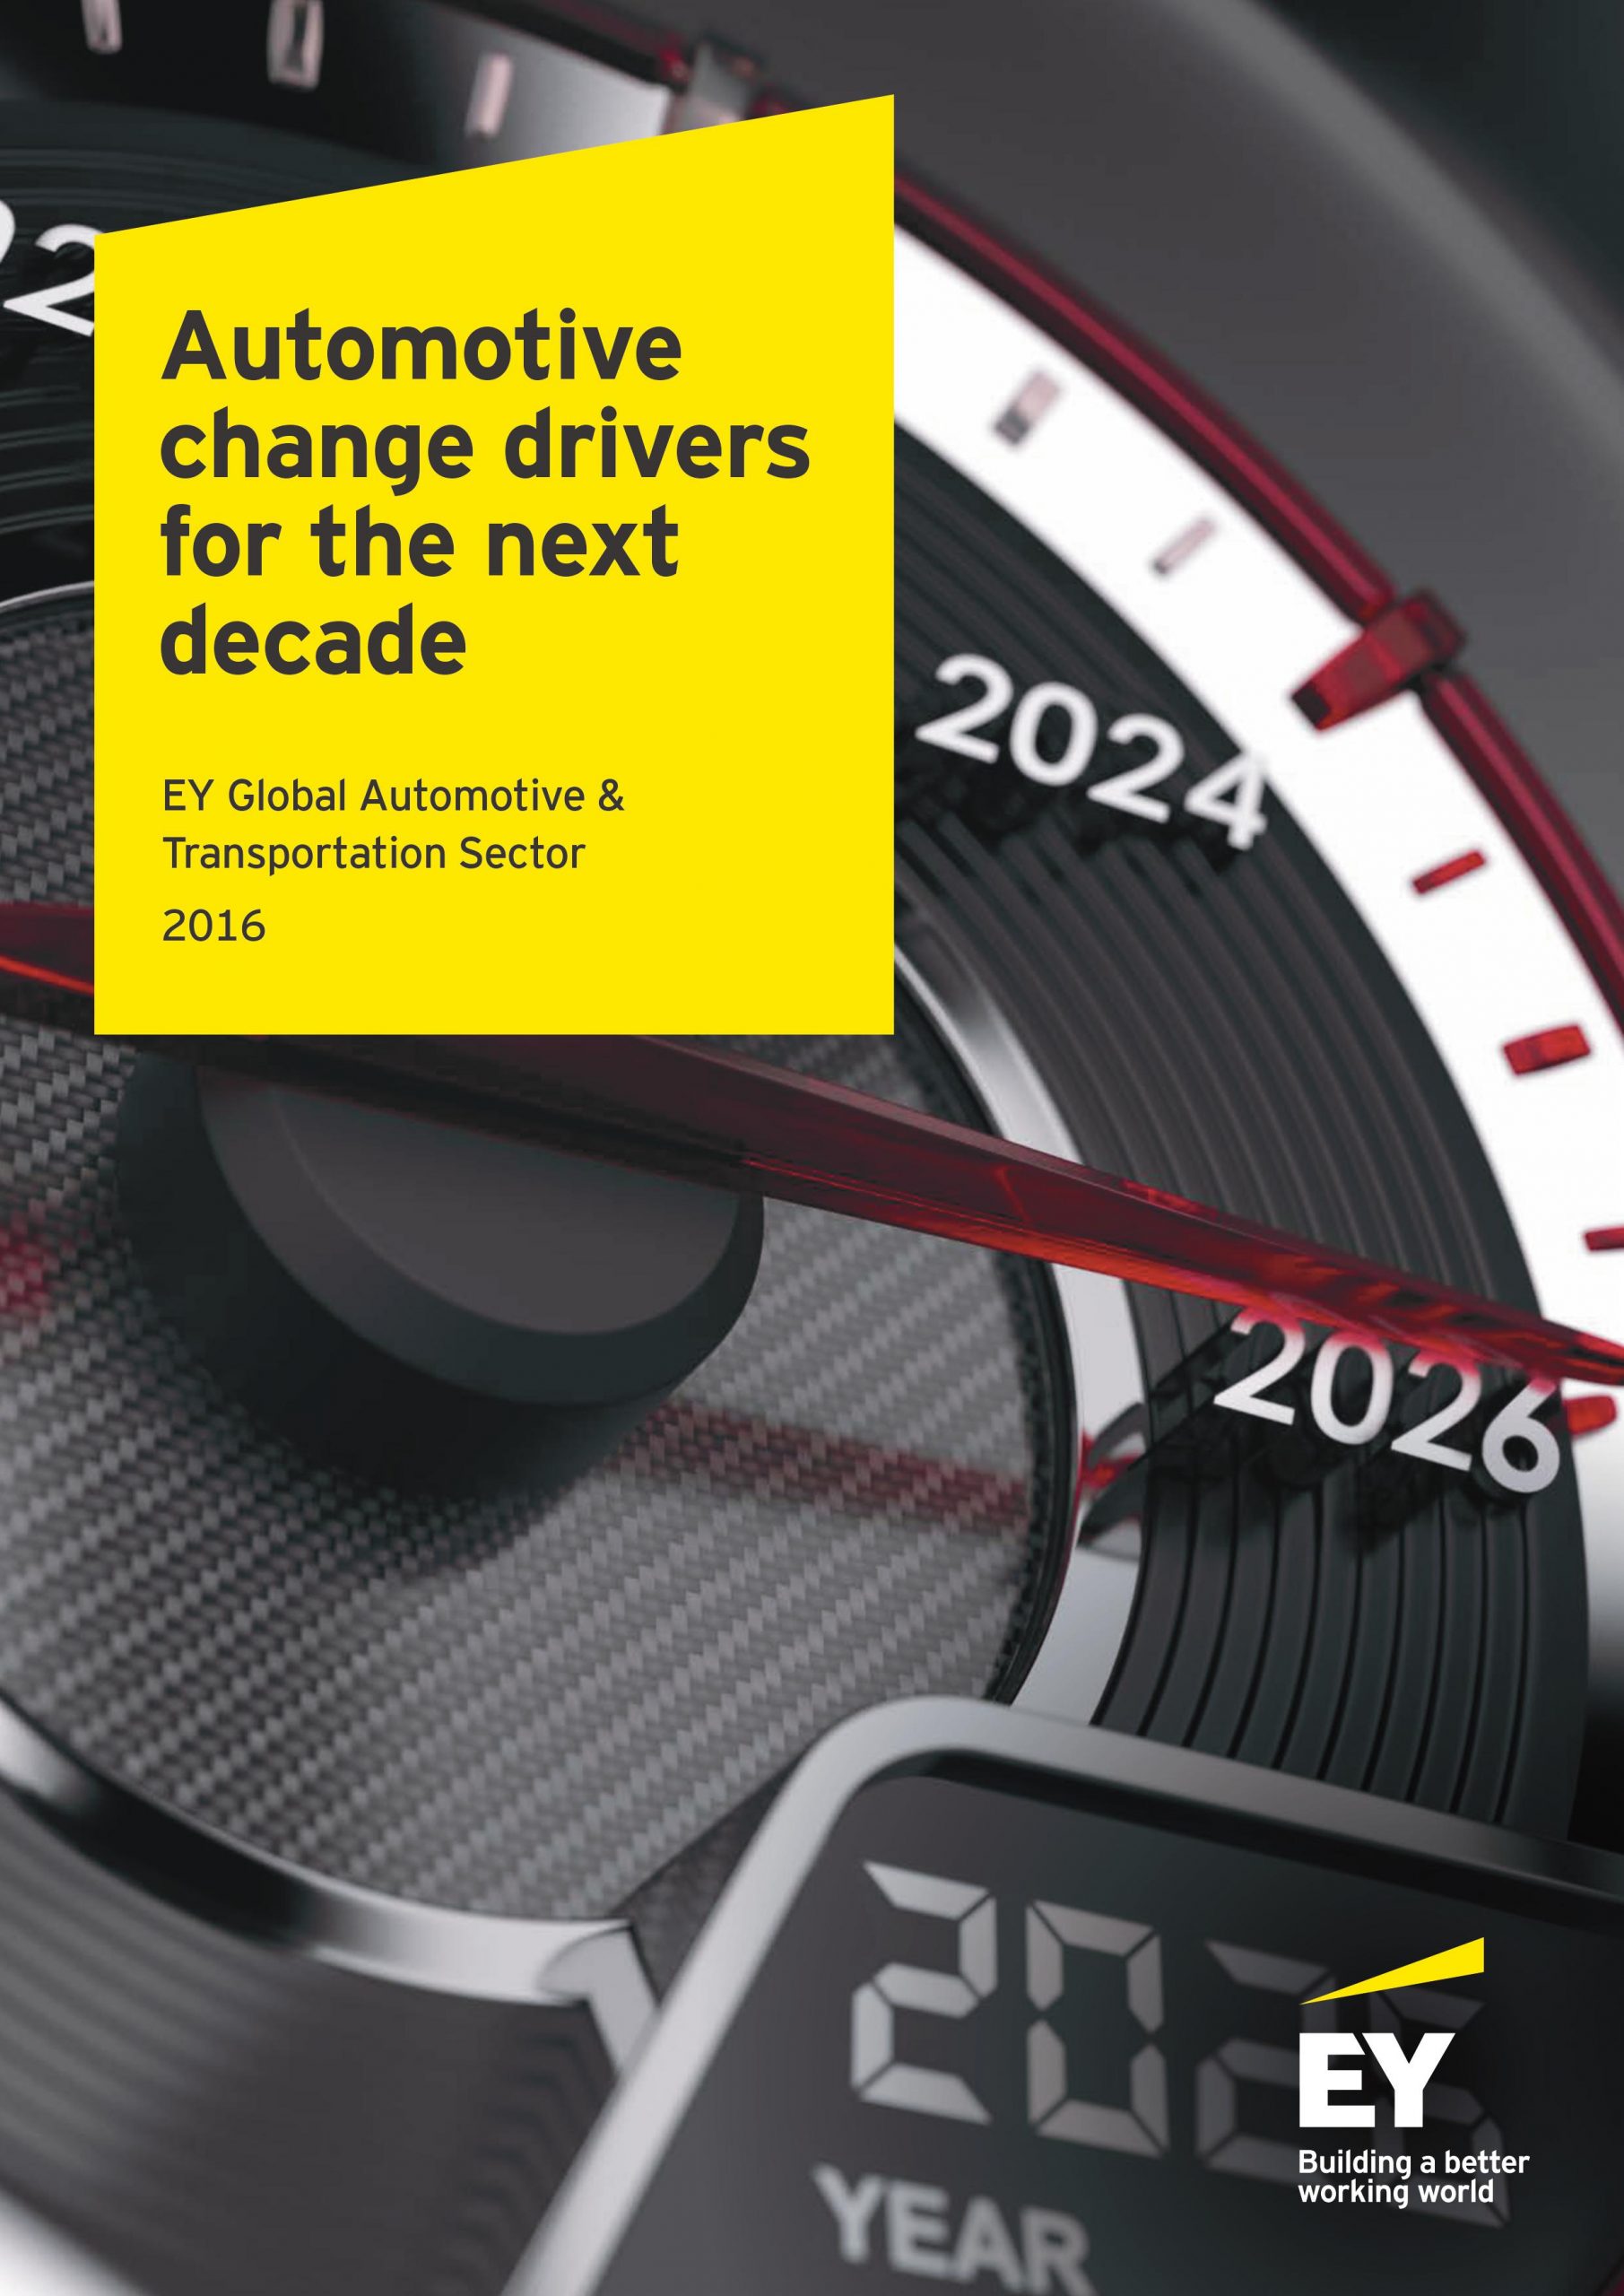 Automotive Change Drivers For the Next Decade